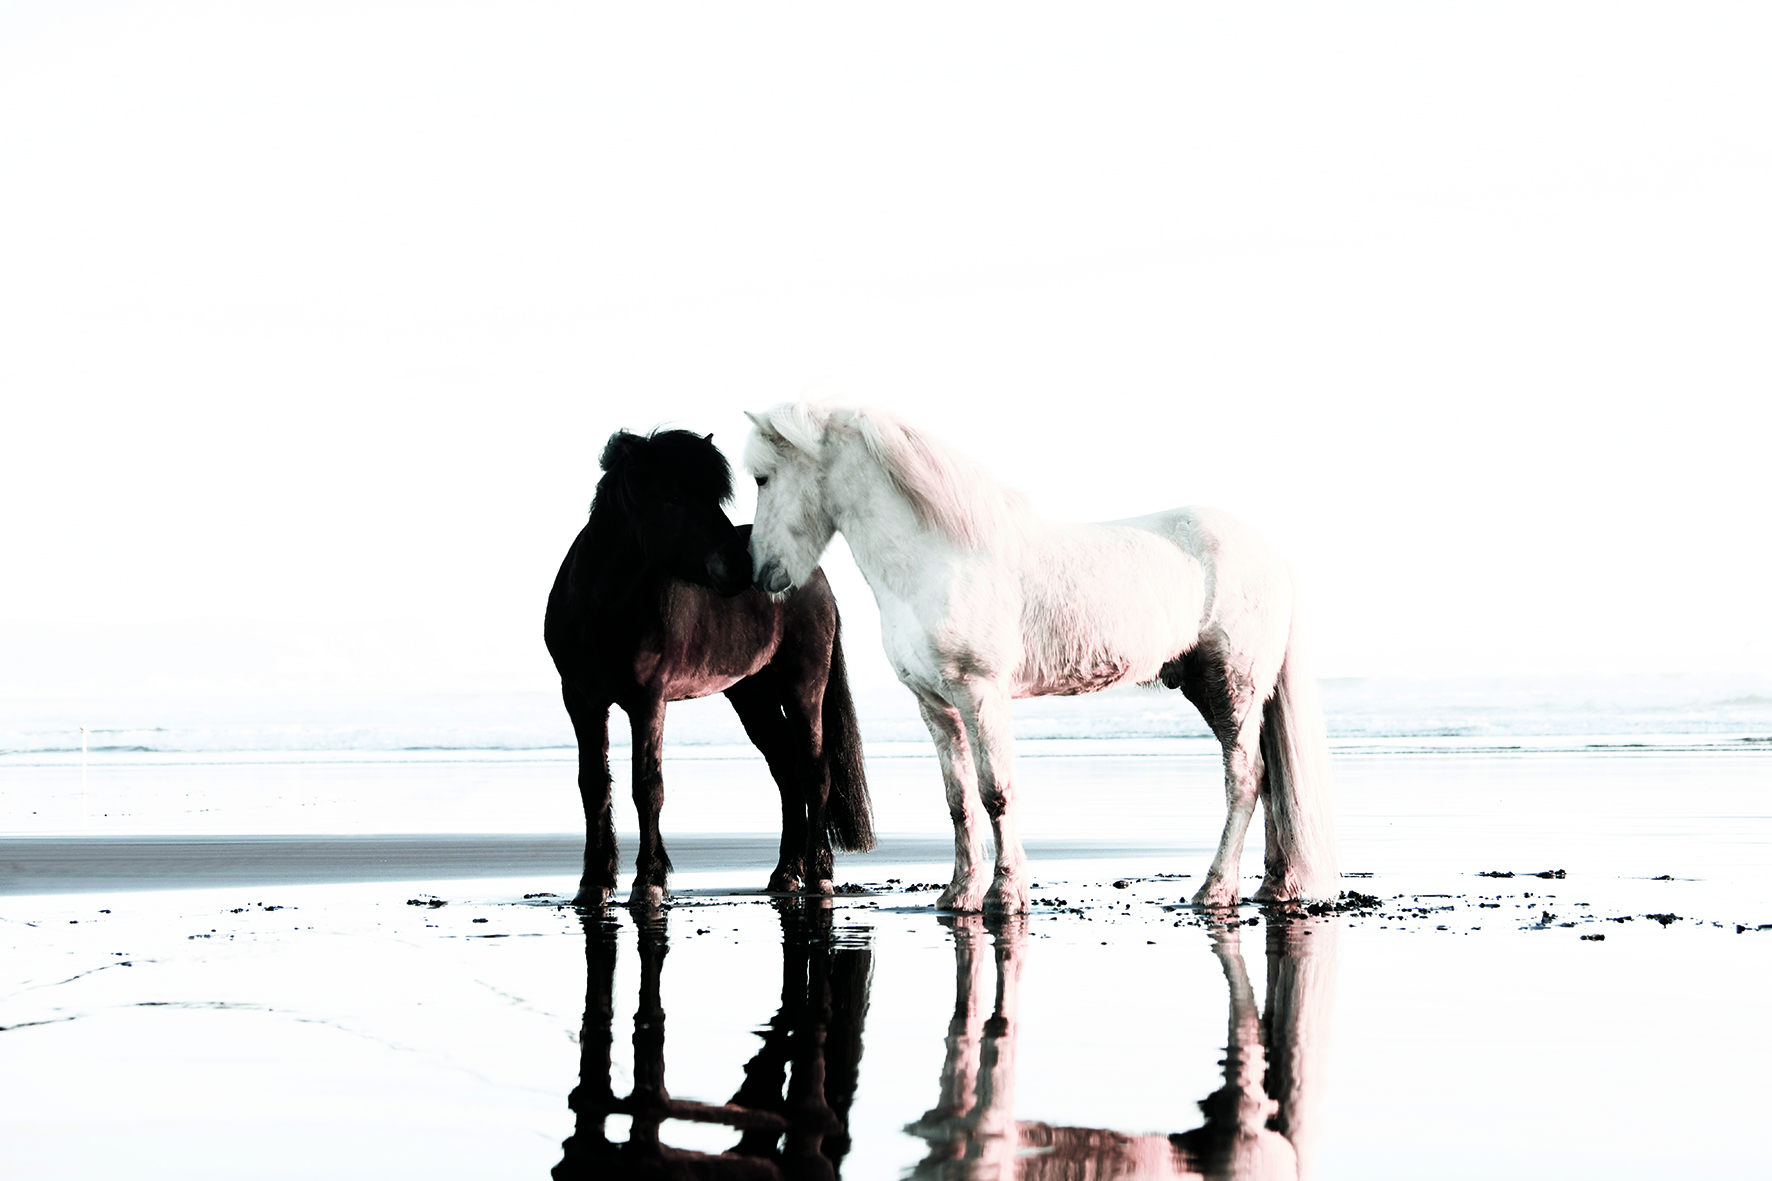 Ethereal Equines by Guadalupe Laiz